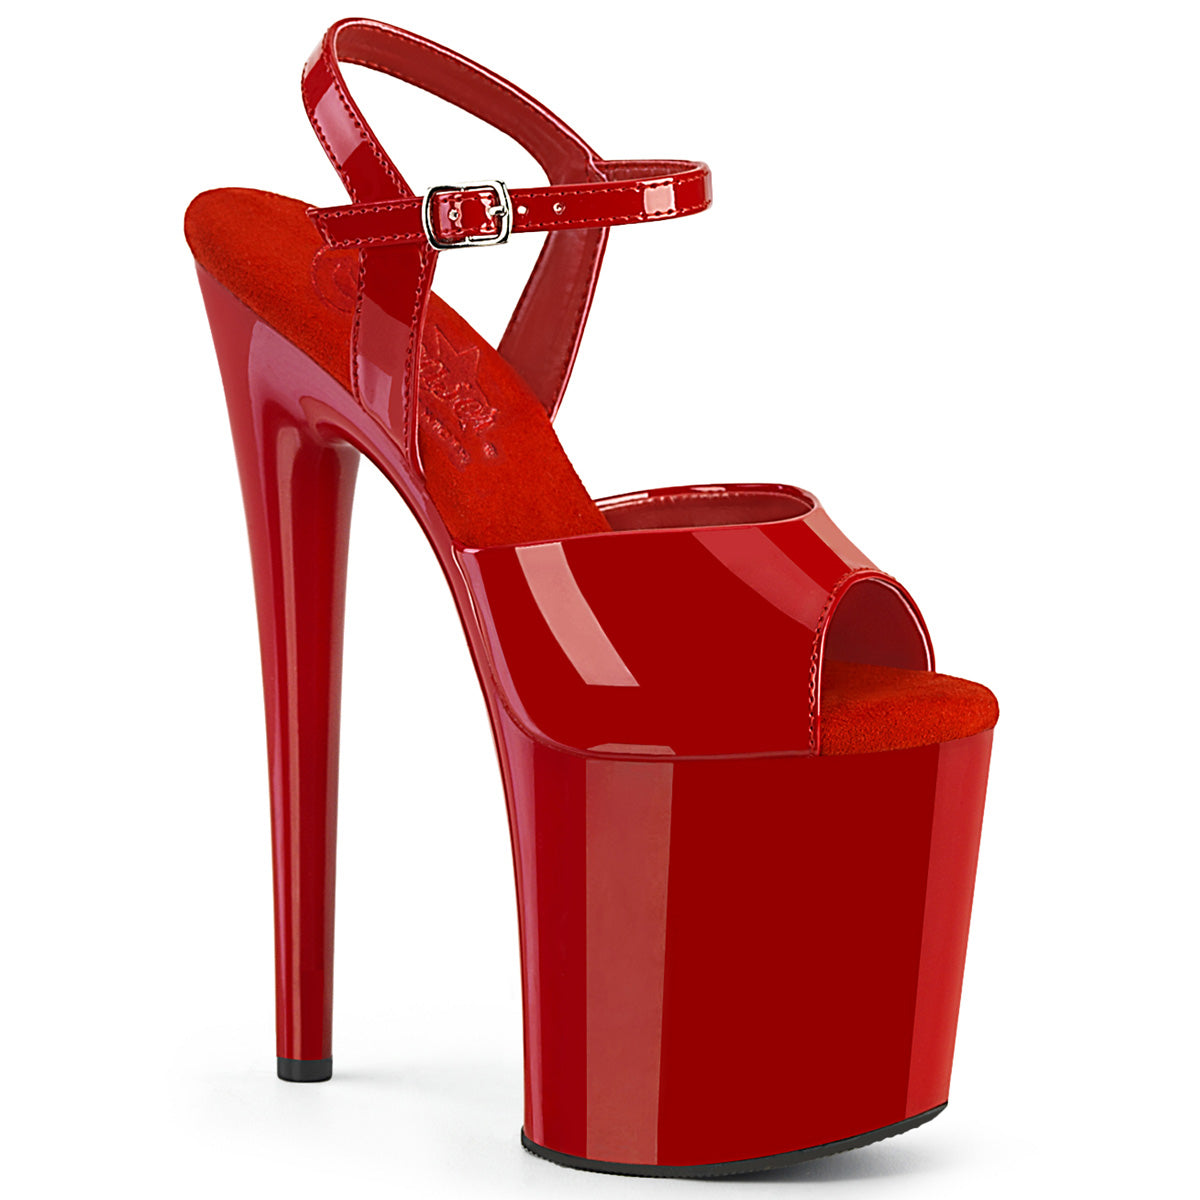 NAUGHTY-809-Red-Pat-Red-Pleaser-Platforms-(Exotic-Dancing)